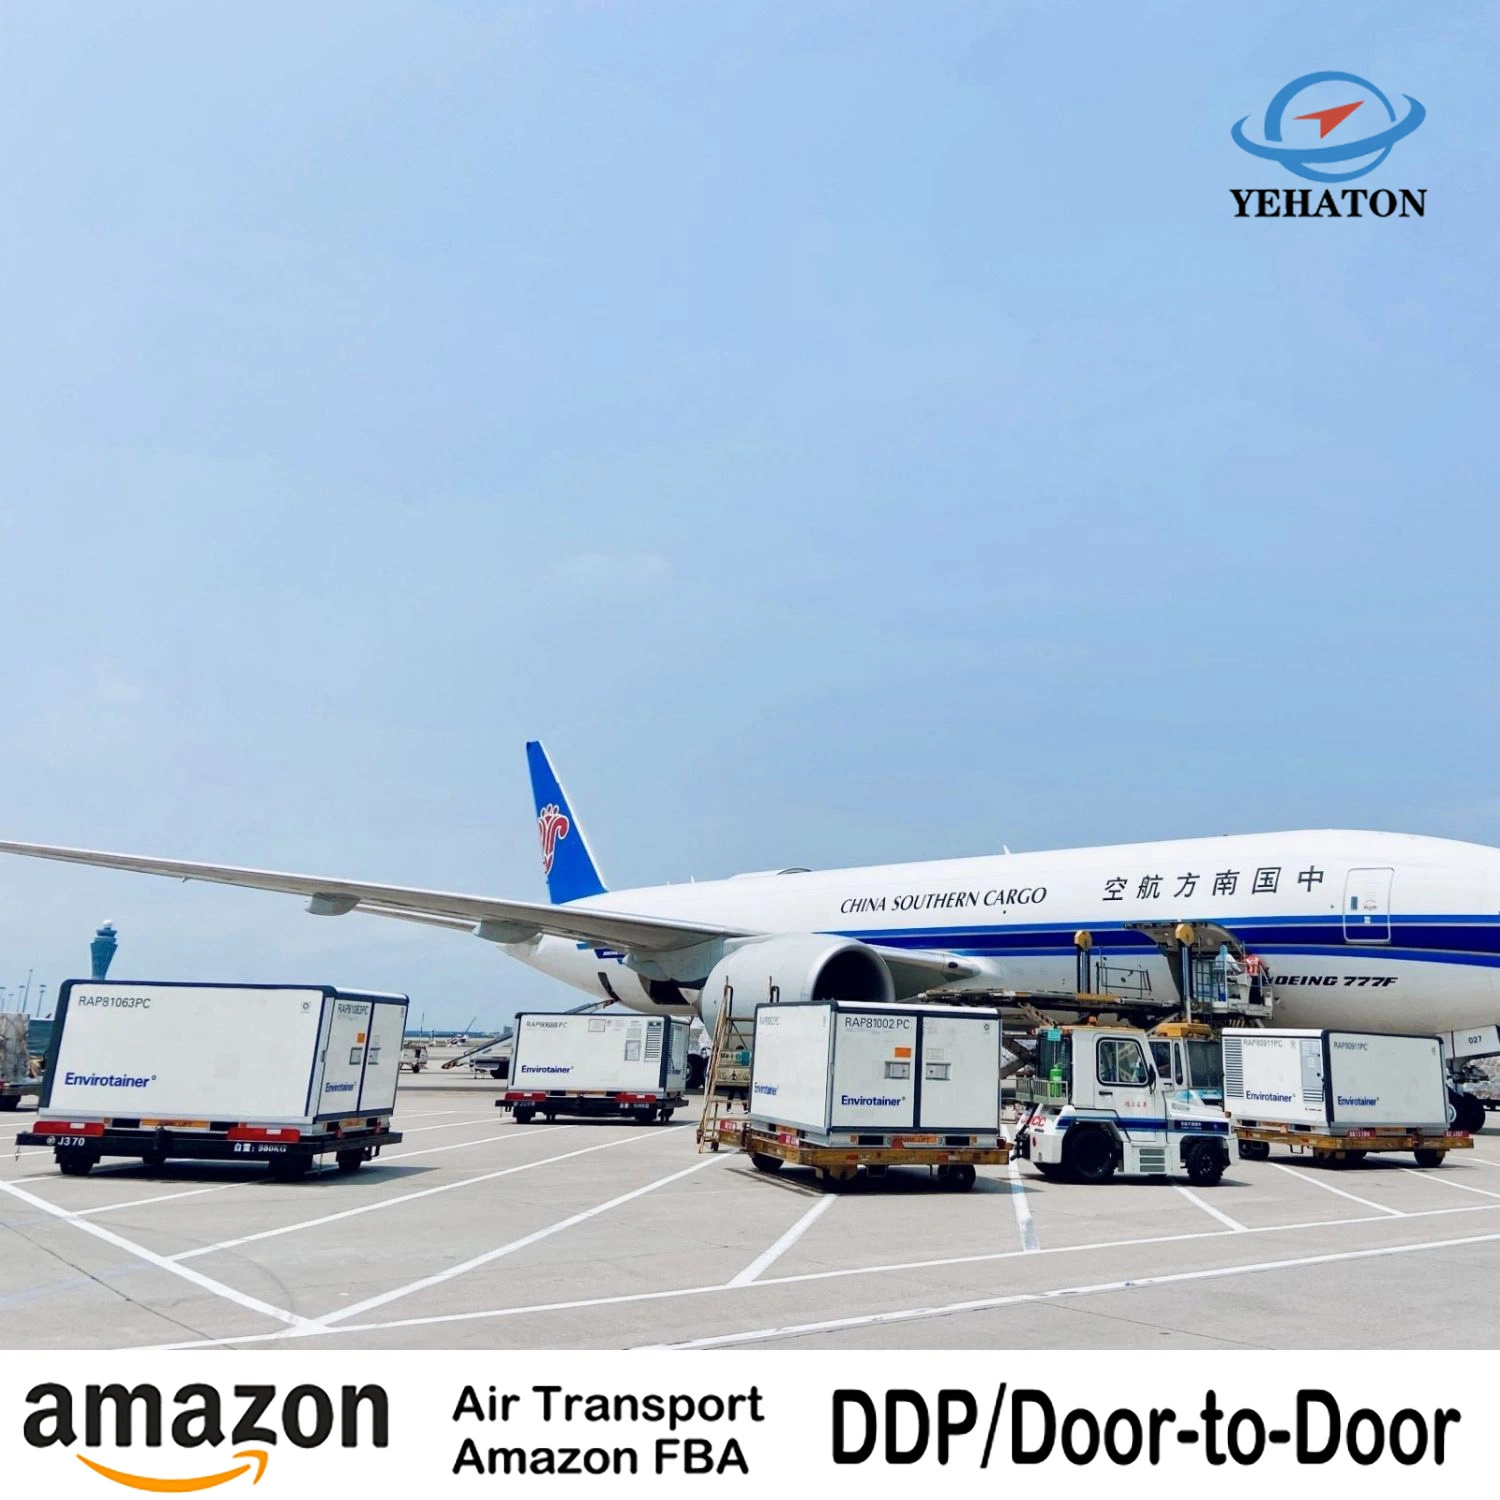 Cheap Air Cargo Ship Price Wholesale Fast Logistics Service Freight Forwarder, Alibaba Express Drop Shipping Agent From China to Europe Canada UK